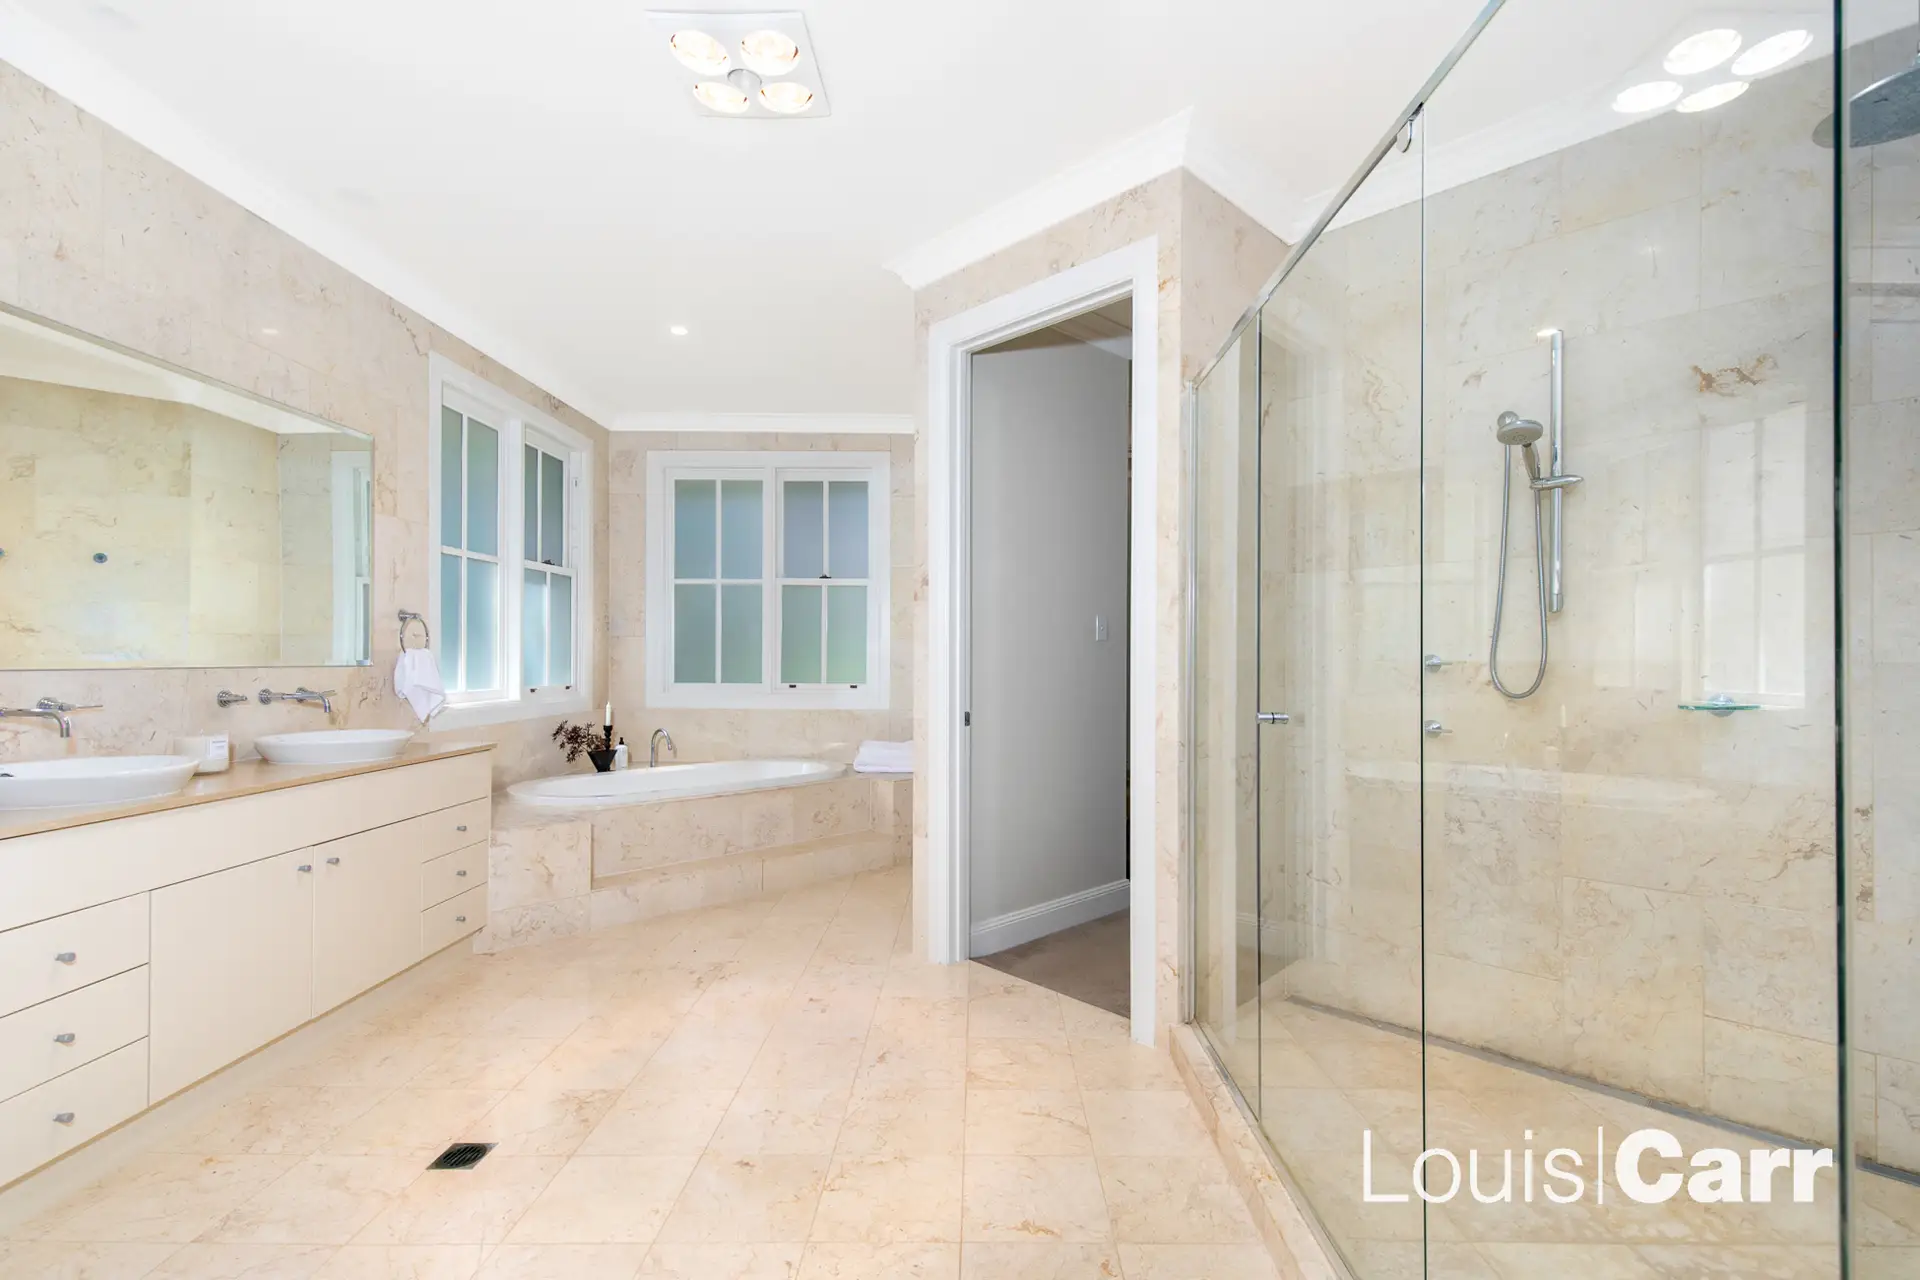 Photo #14: 23 Doris Hirst Place, West Pennant Hills - Sold by Louis Carr Real Estate